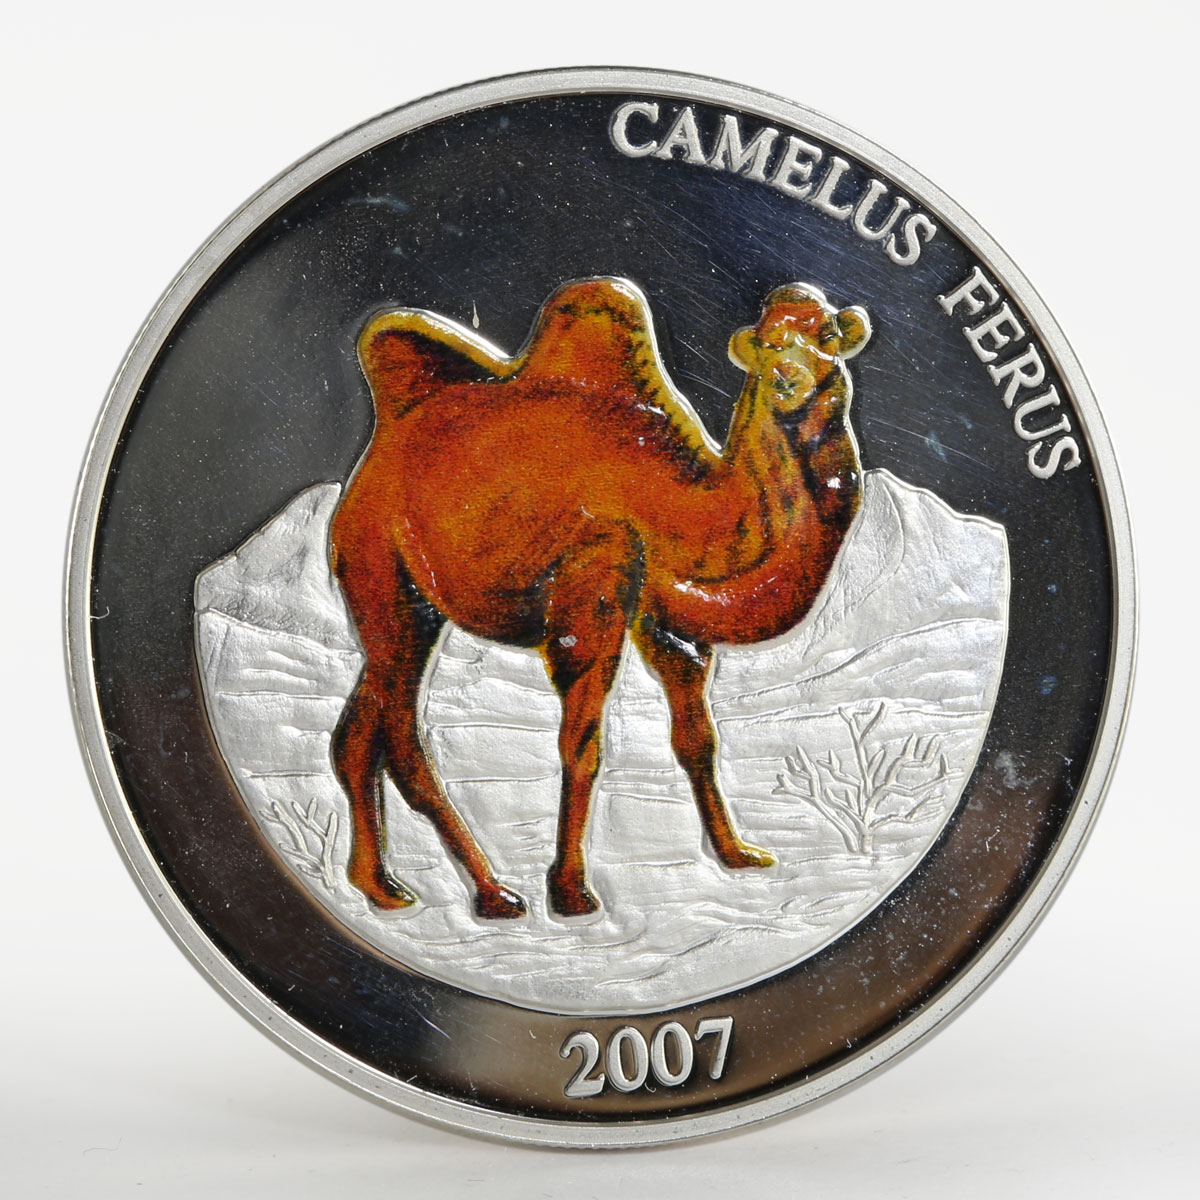 Mongolia 500 togrog Camelus Ferus colored silver proof coin 2007